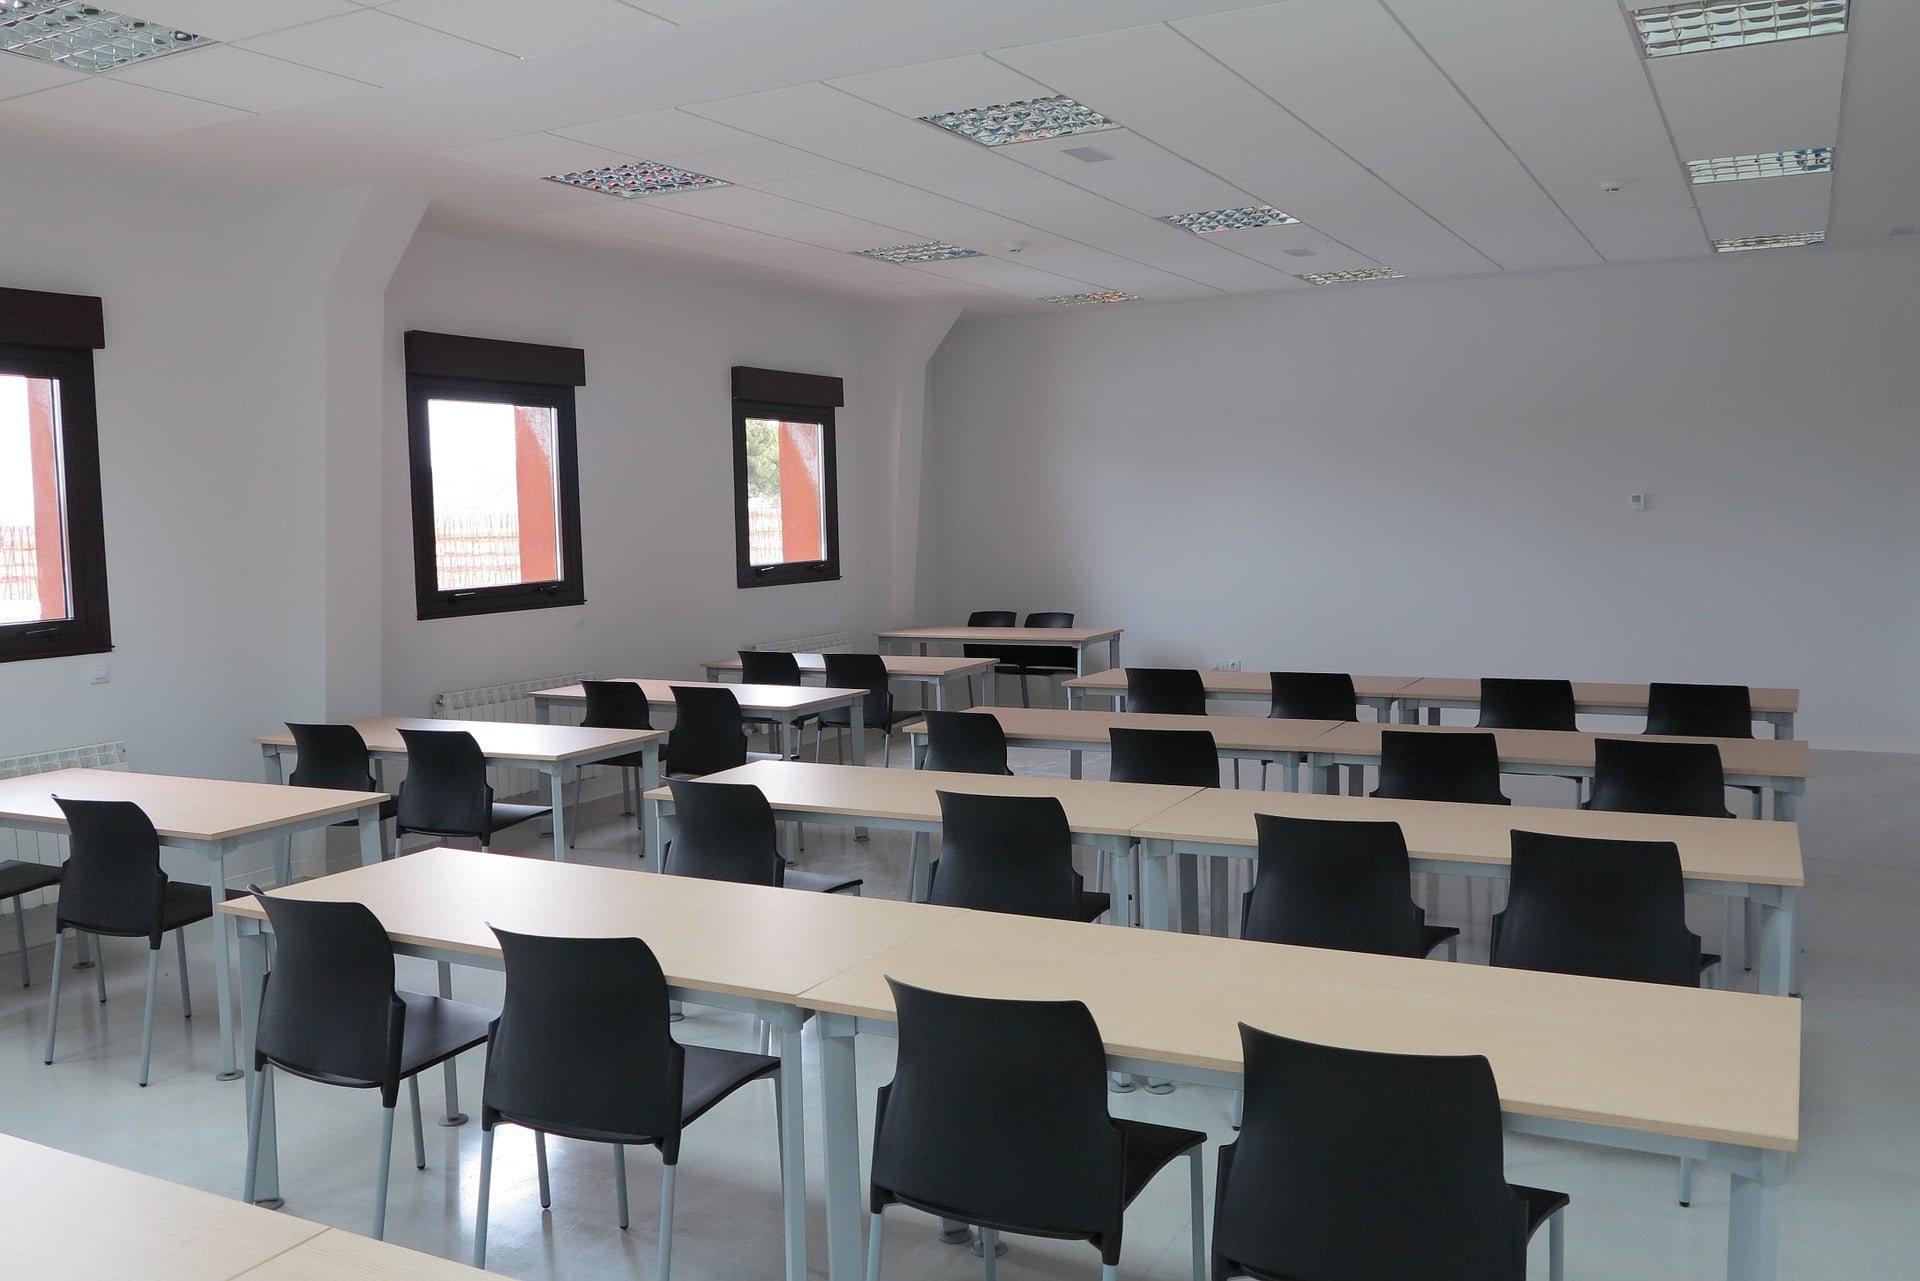 A classroom.  Another costly misconception of training.